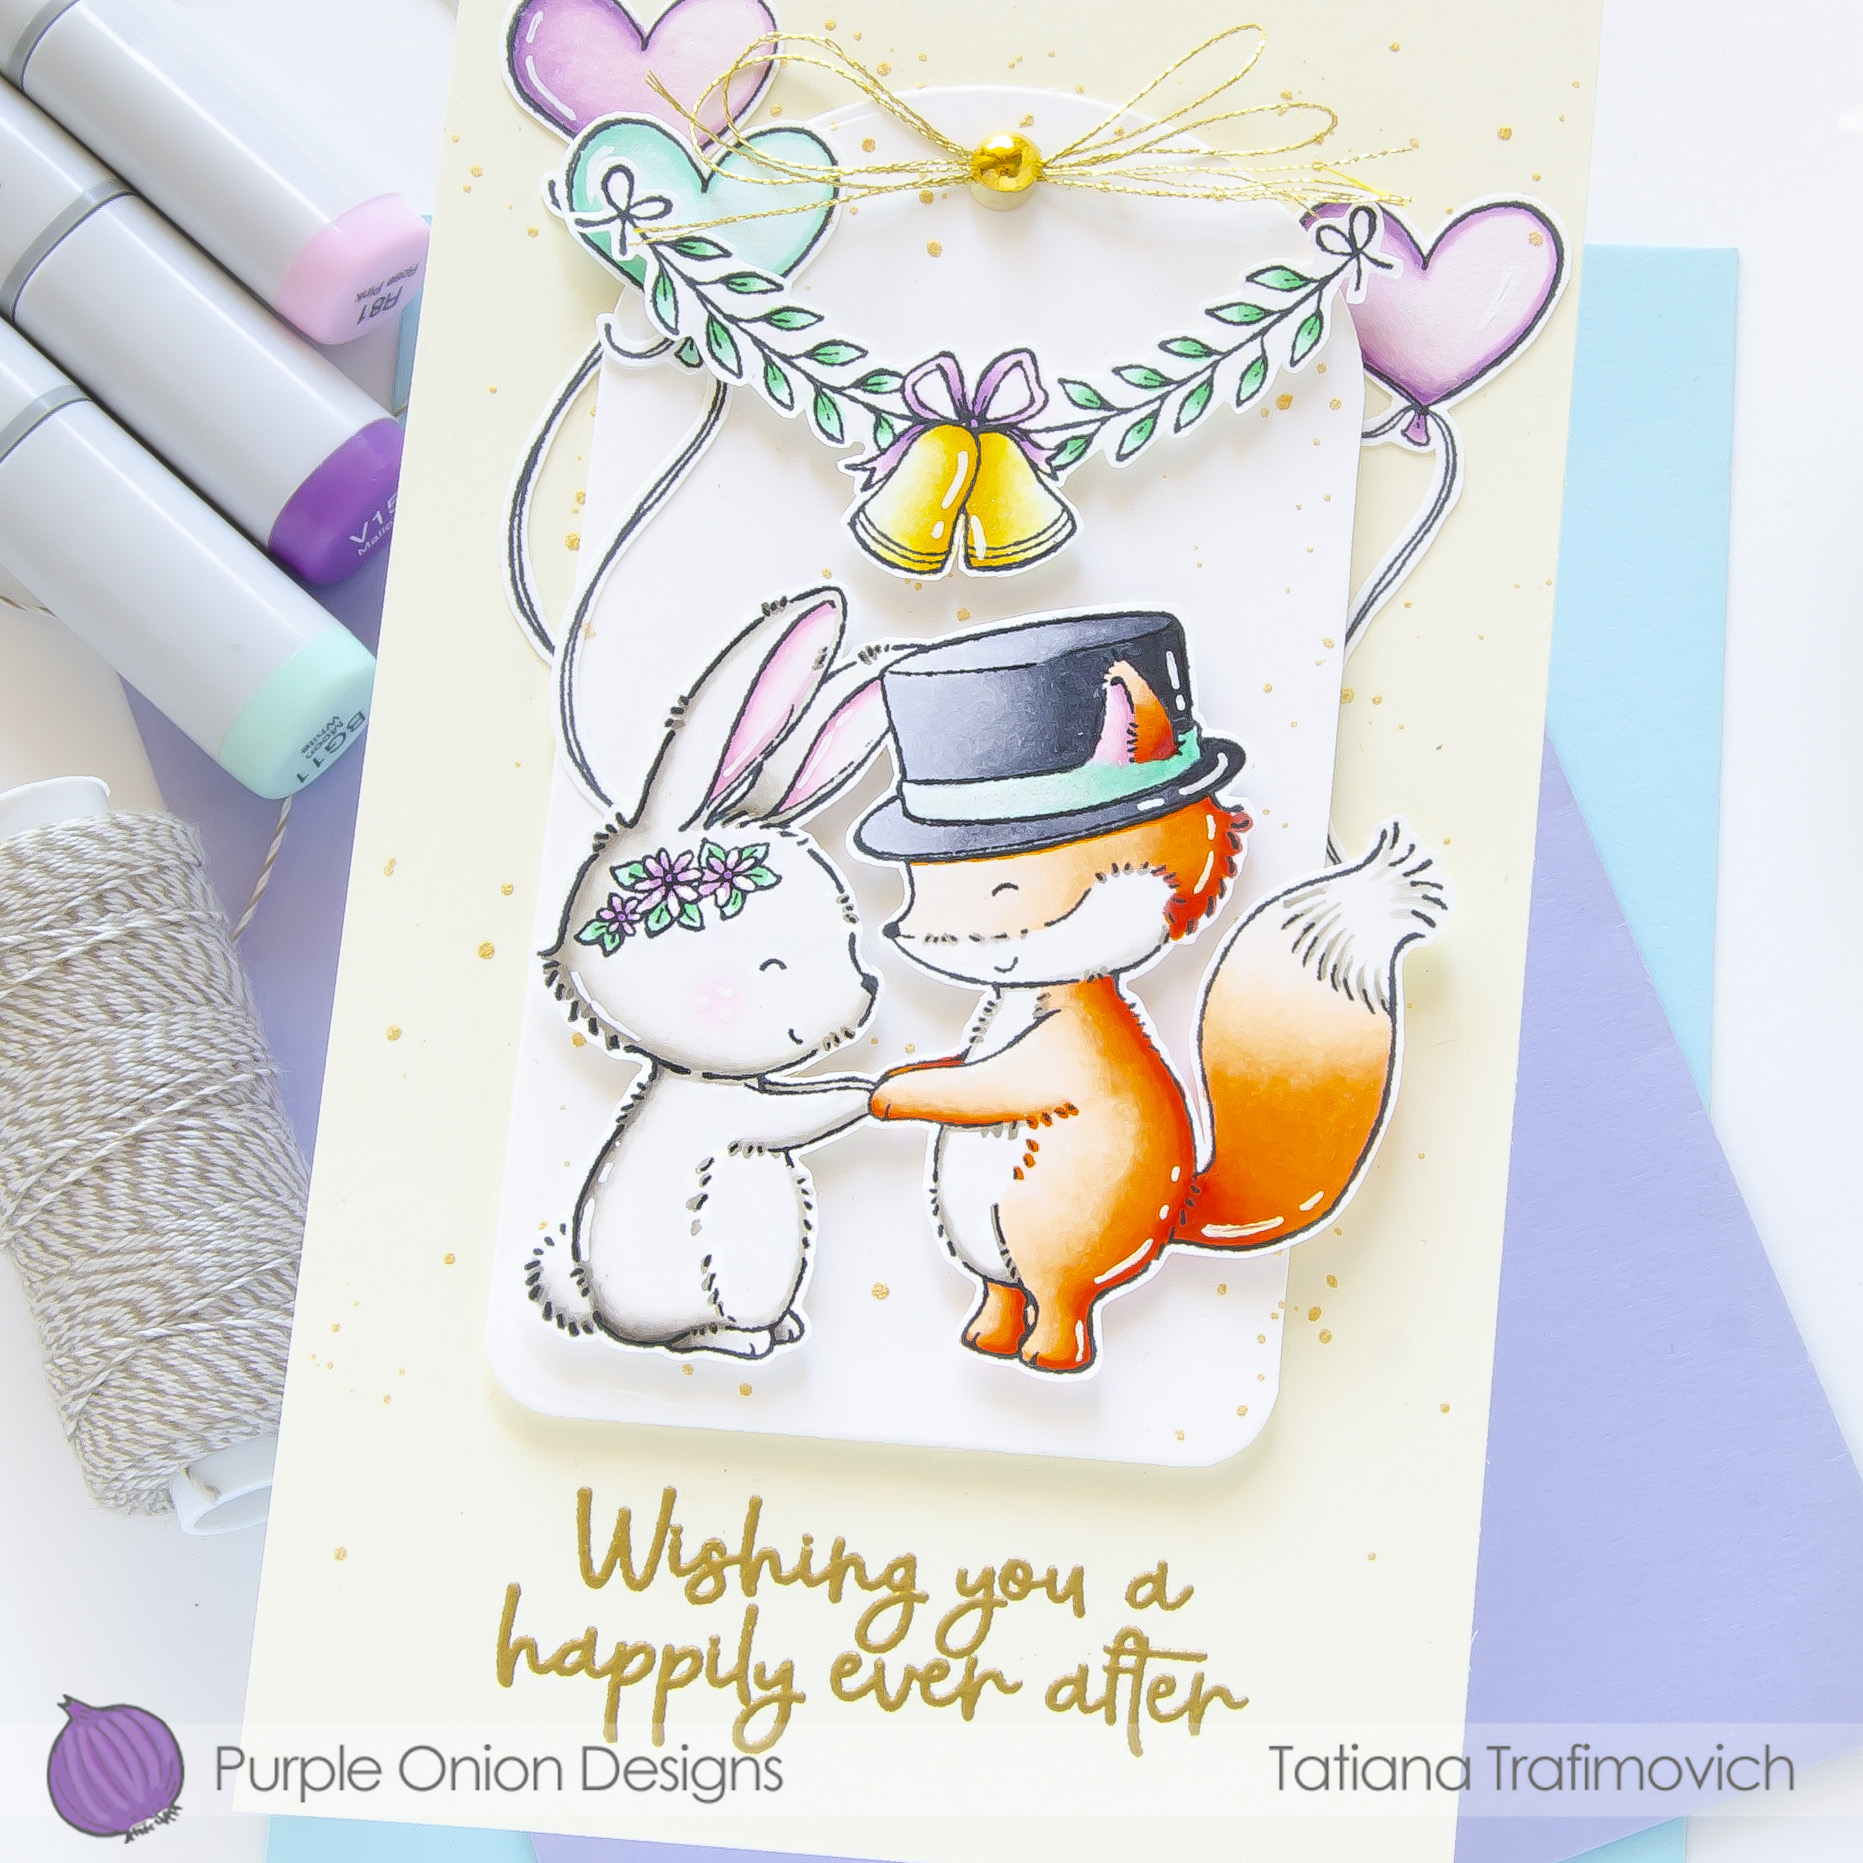 Wishing You A Happily Ever After #handmade card by Tatiana Trafimovich #tatianacraftandart - stamps by Purple Onion Designs